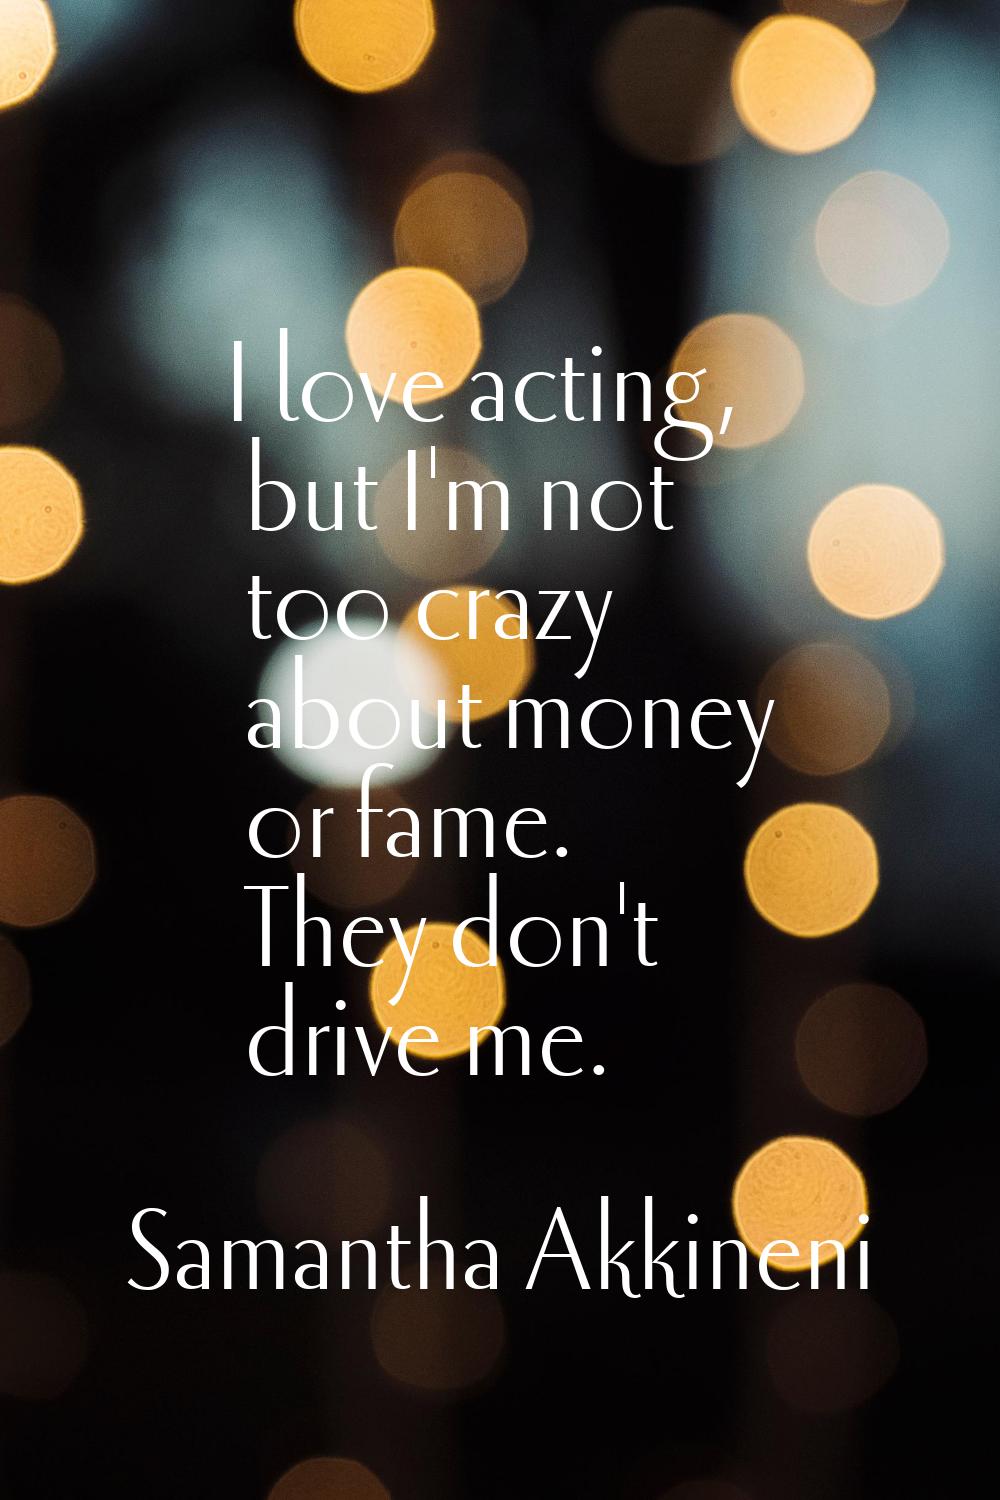 I love acting, but I'm not too crazy about money or fame. They don't drive me.